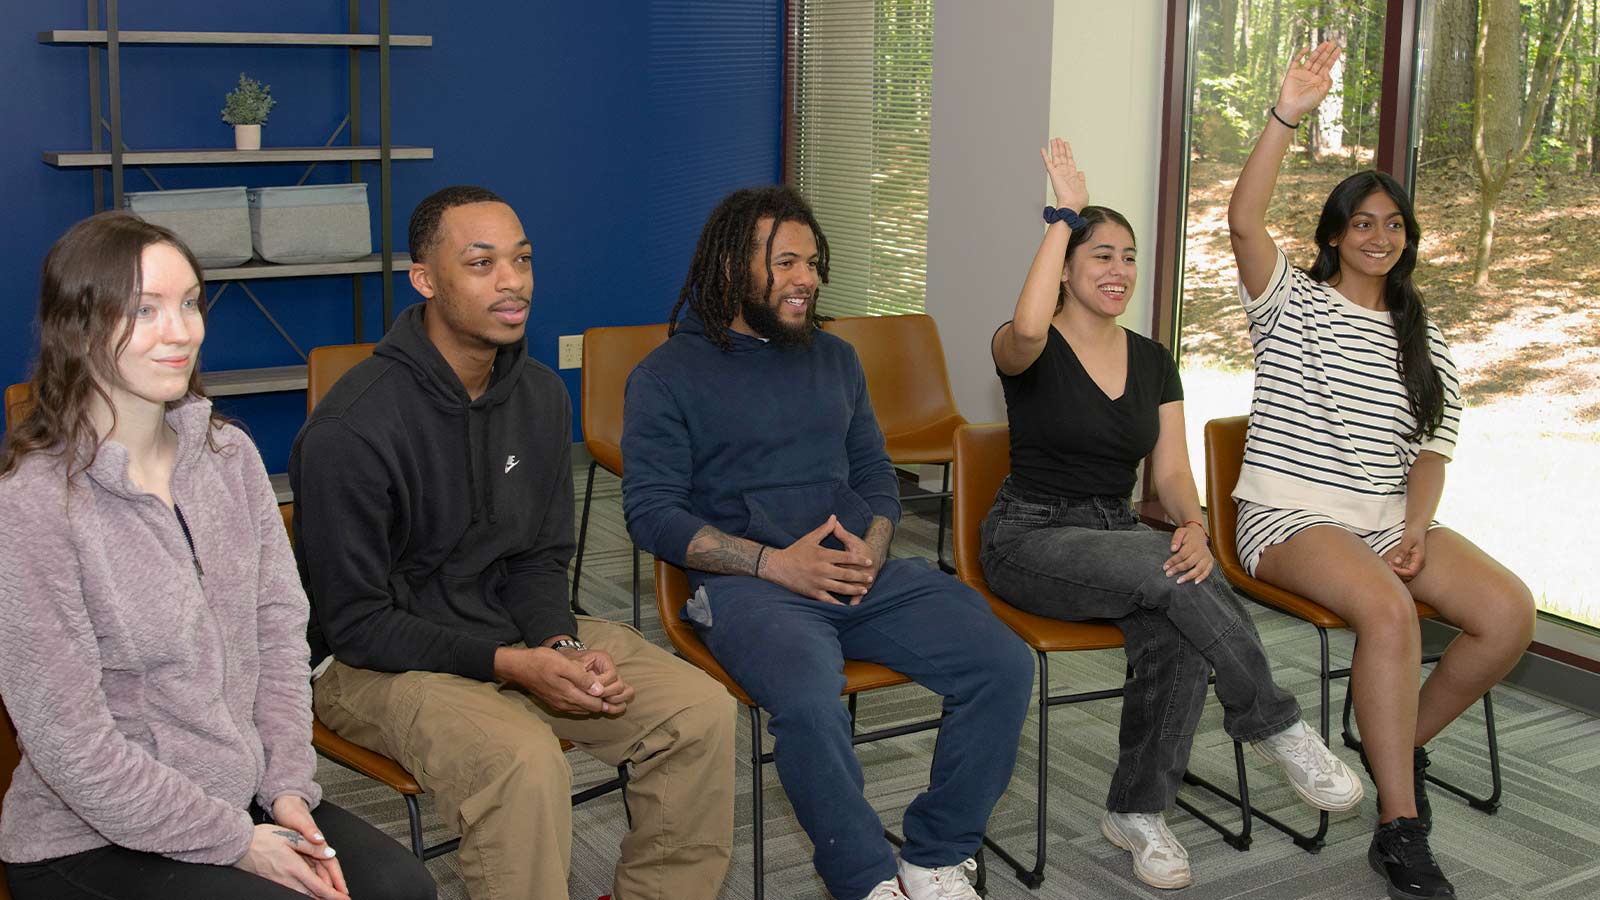 A group educational session with two people raising their hands.